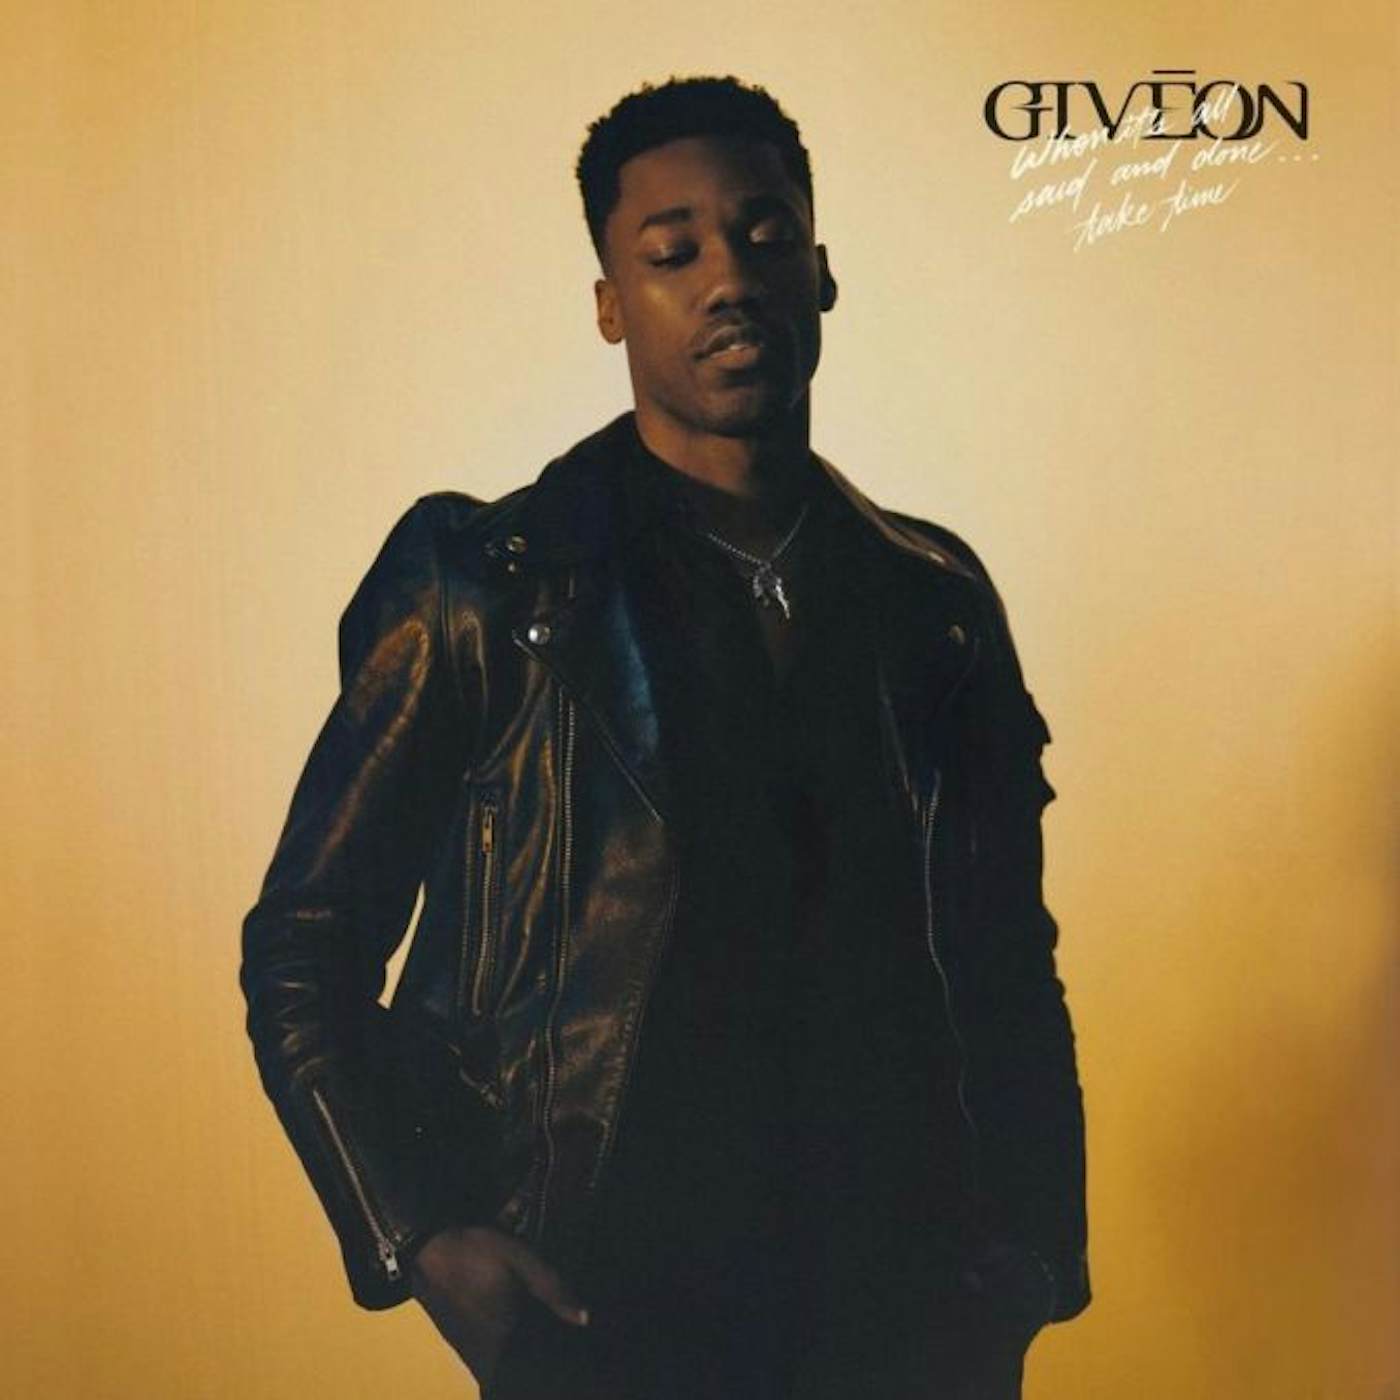 Giveon WHEN IT'S ALL SAID AND DONE: TAKE TIME CD